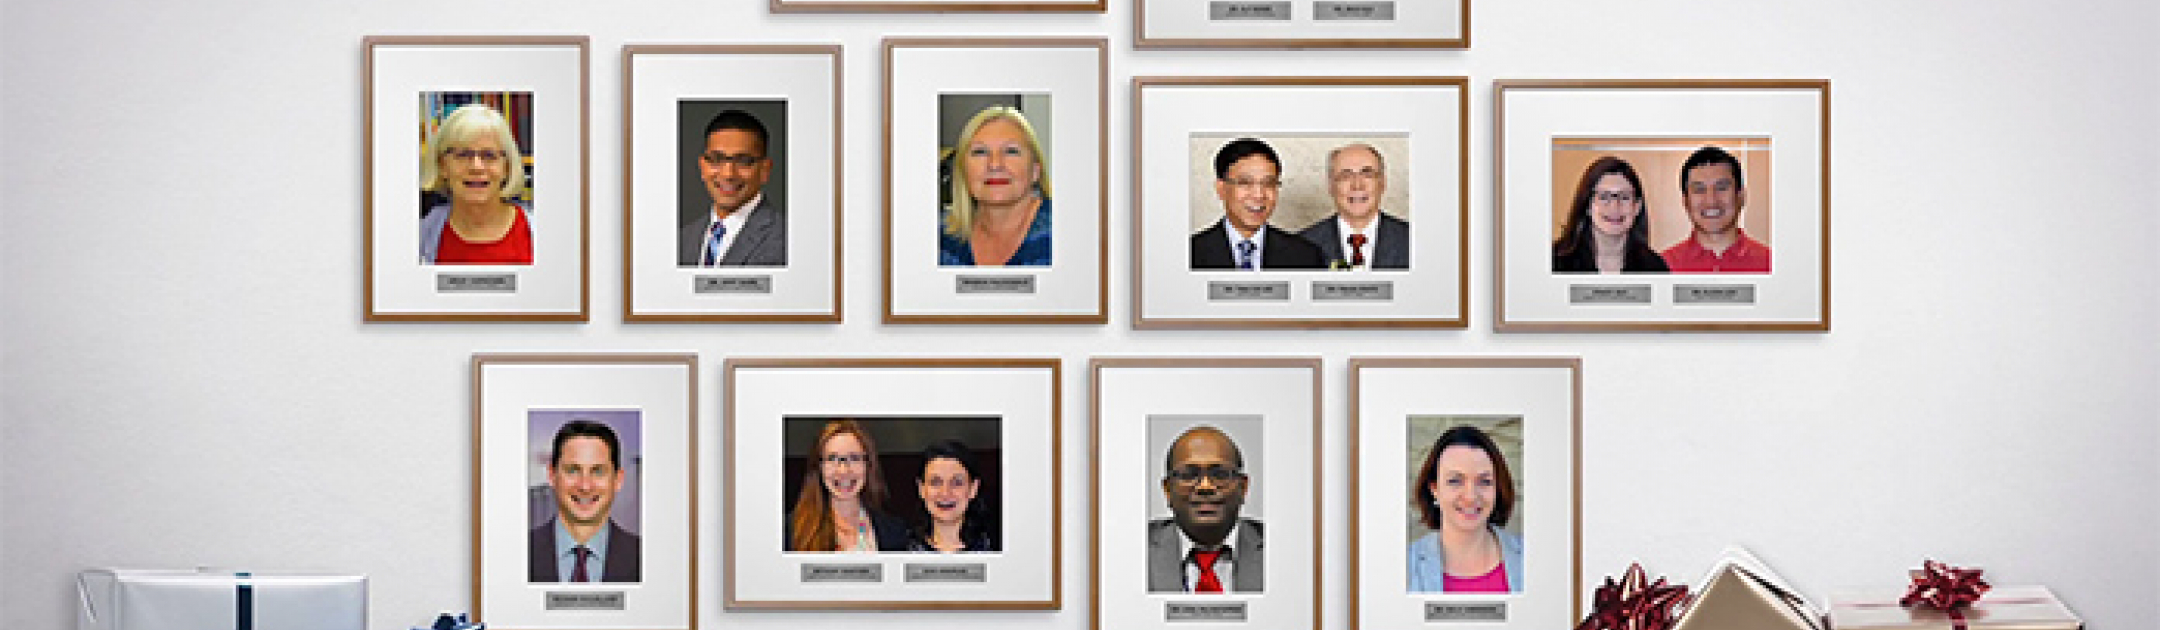 Screenshot of Lawson personnel portraits from 2016 Holiday E-Card